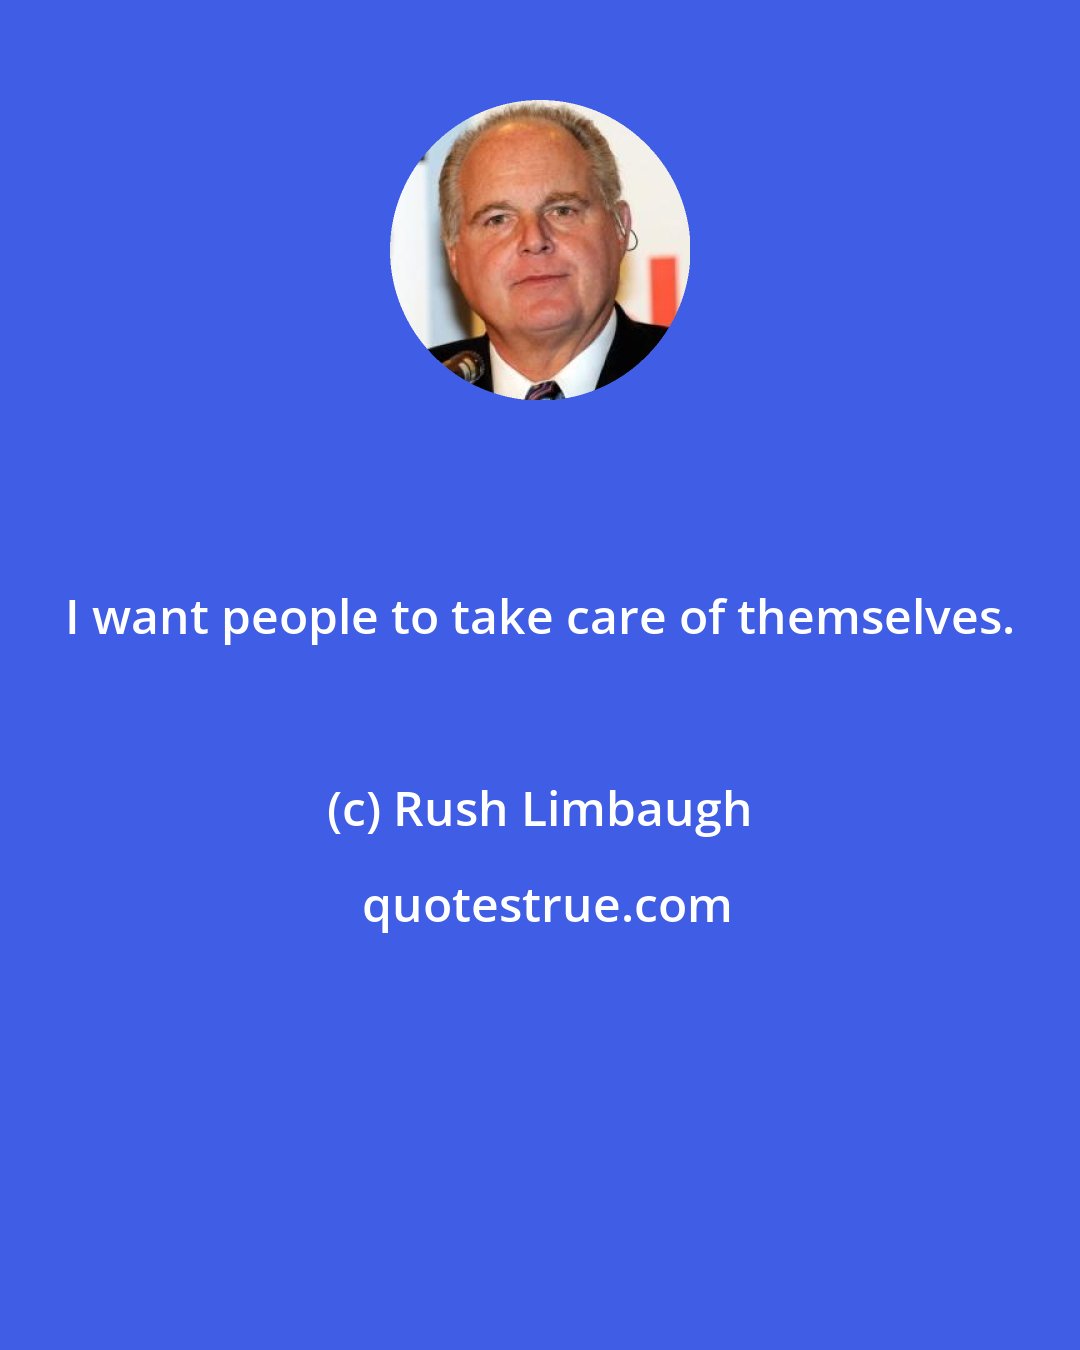 Rush Limbaugh: I want people to take care of themselves.